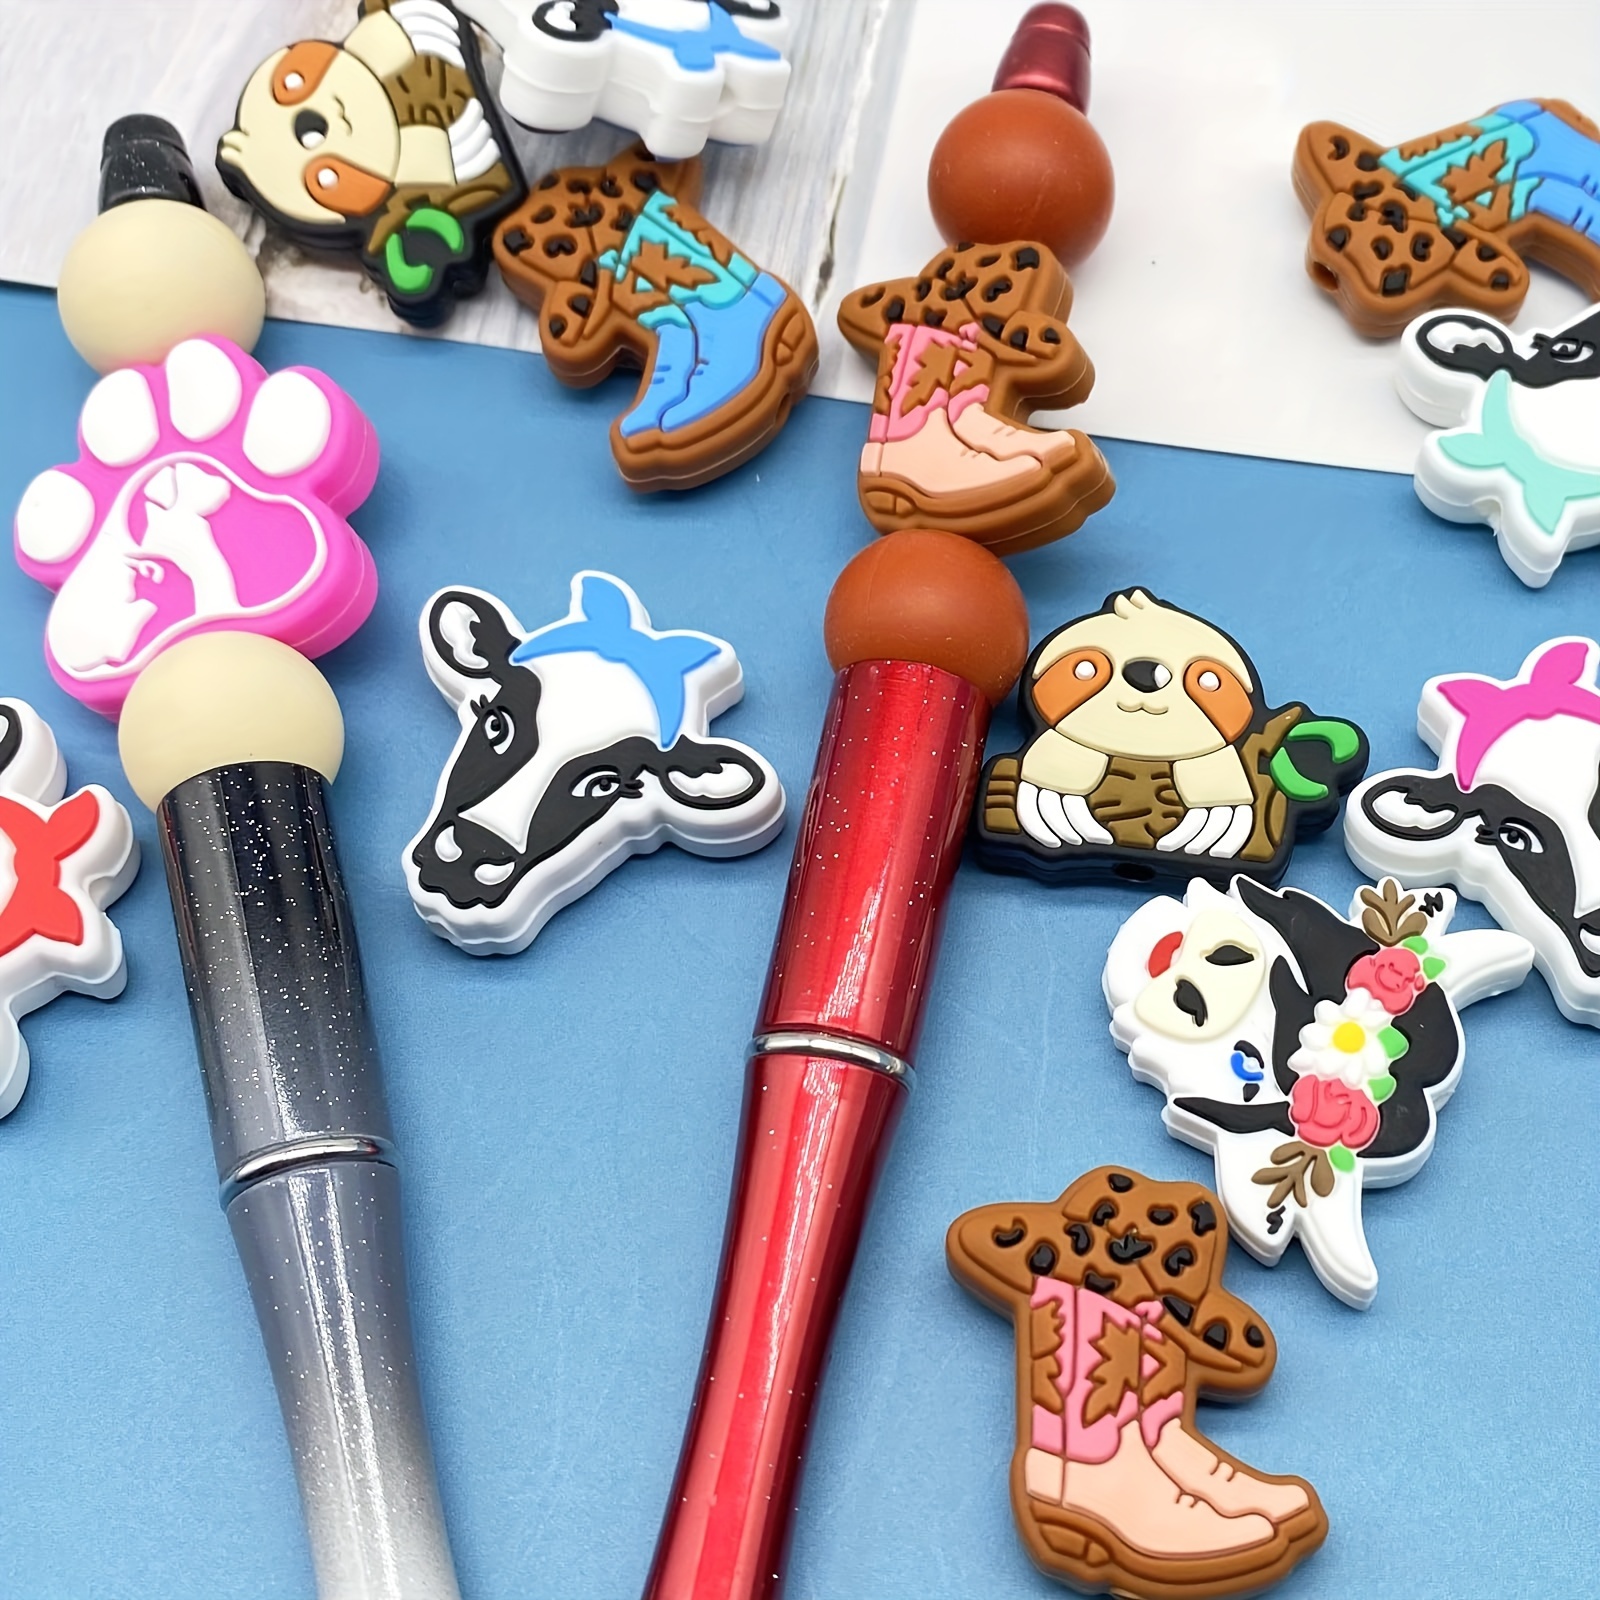 5 Pcs I Woof You Shapes Charms,Animal Dog Paw Silicone Focal Character Spacer Beads for Pens DIY Jewelry Keychain Bracelet Making